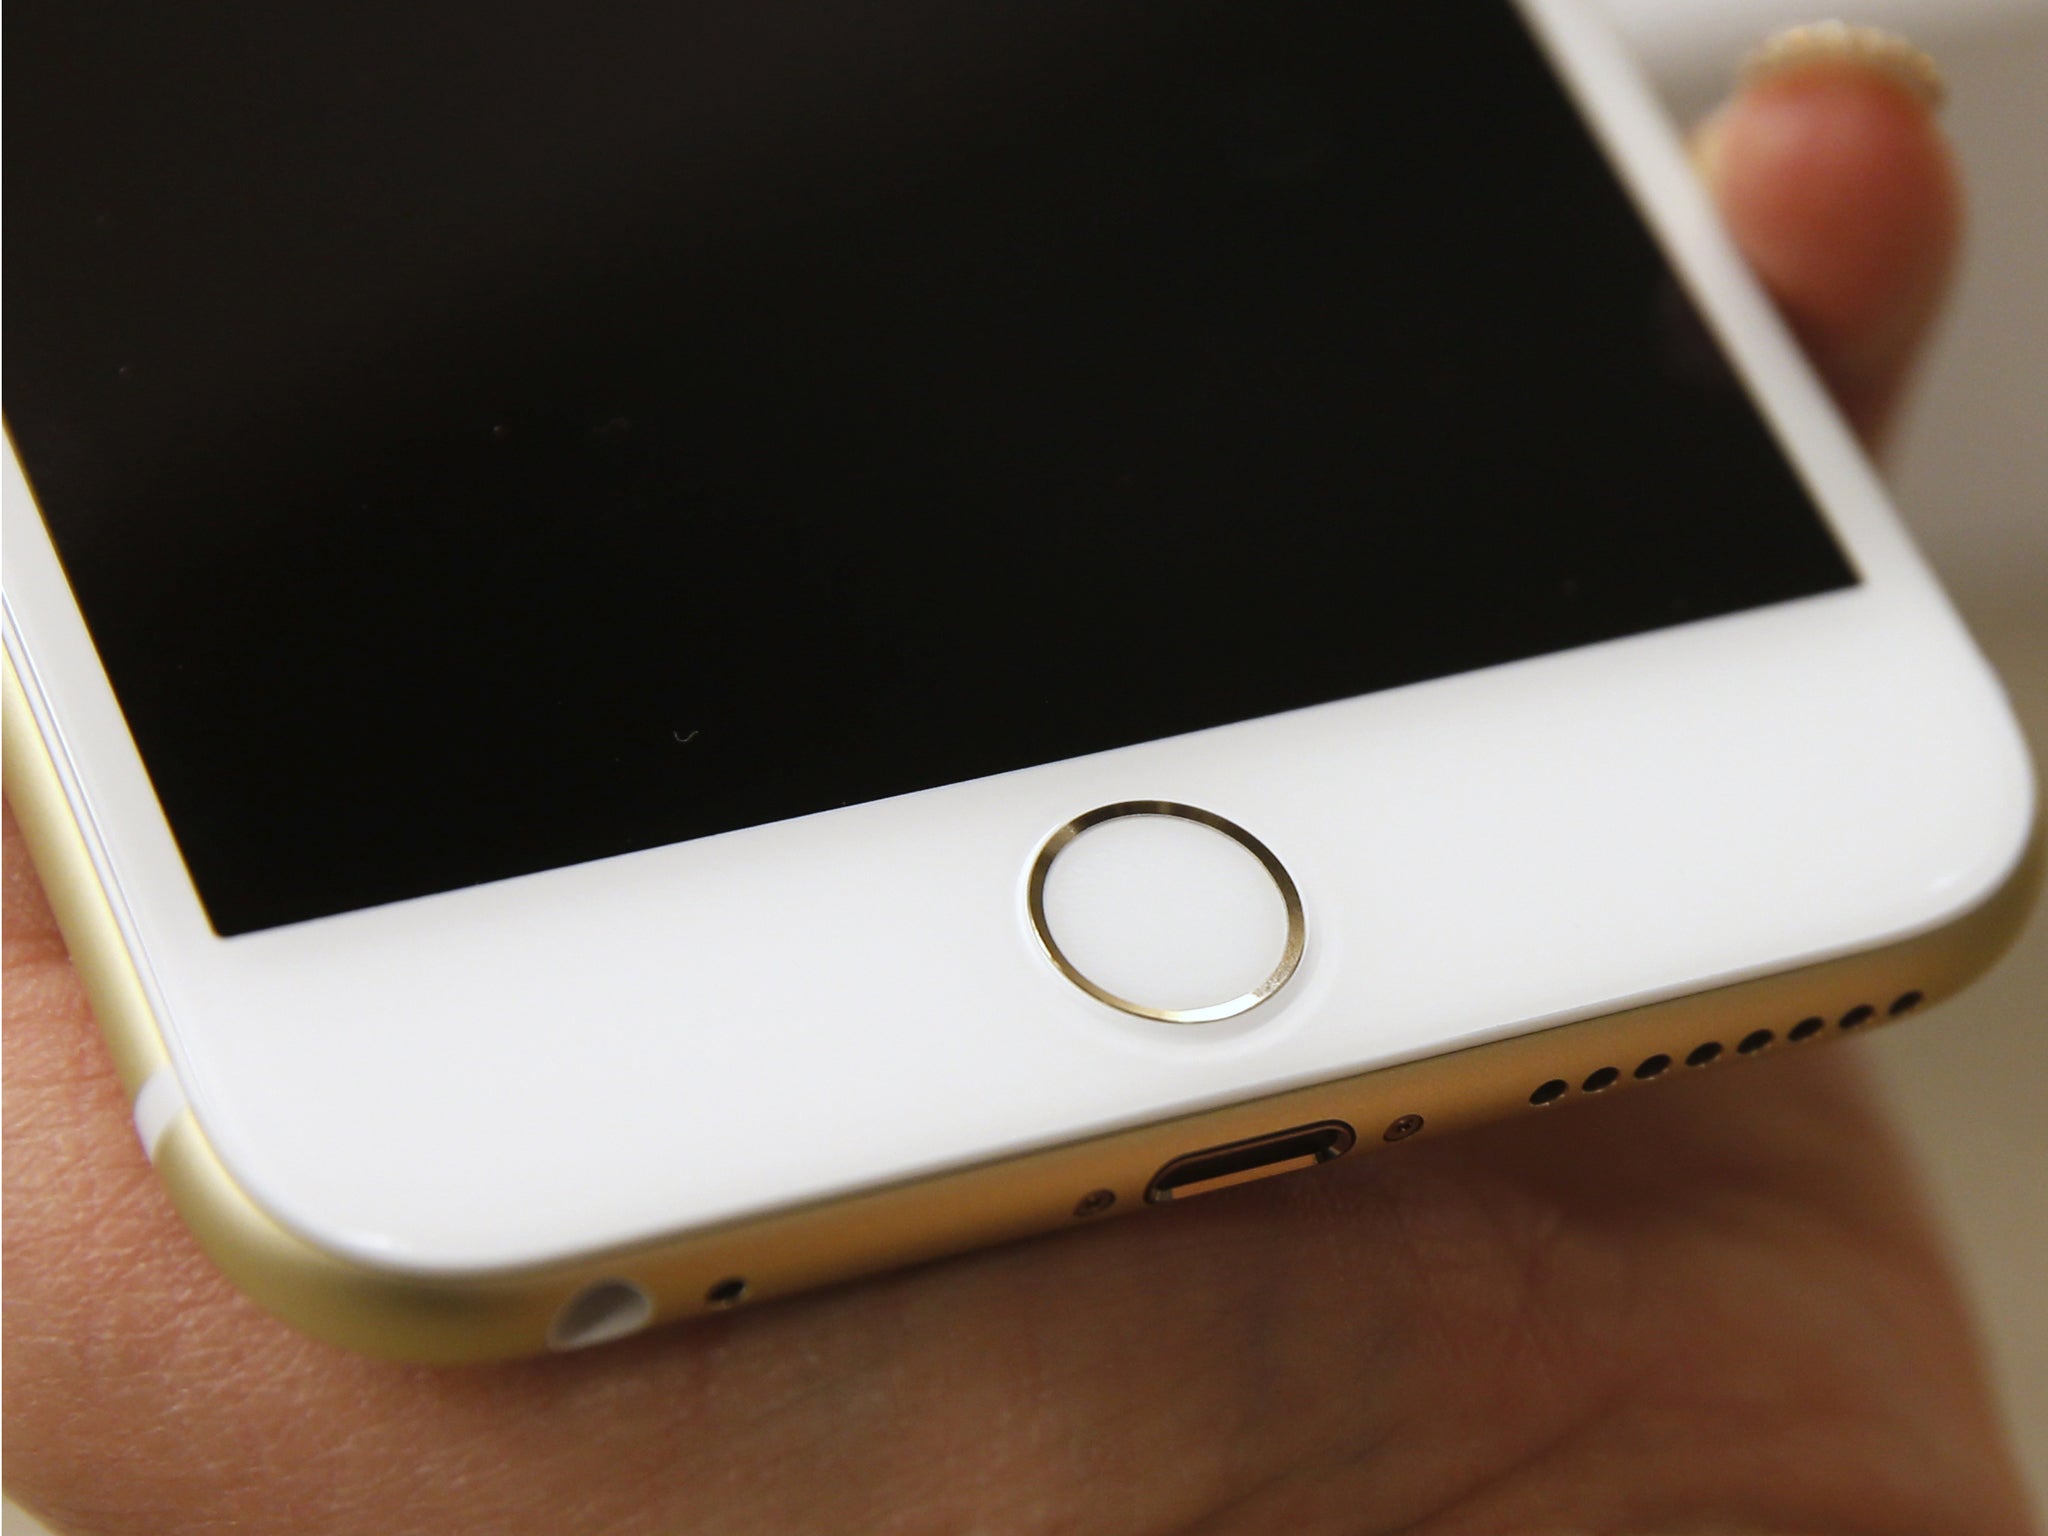 The Touch ID of an Apple iPhone 6 Plus gold, is shown here at a Verizon store on September 18, 2014 in Orem, Utah